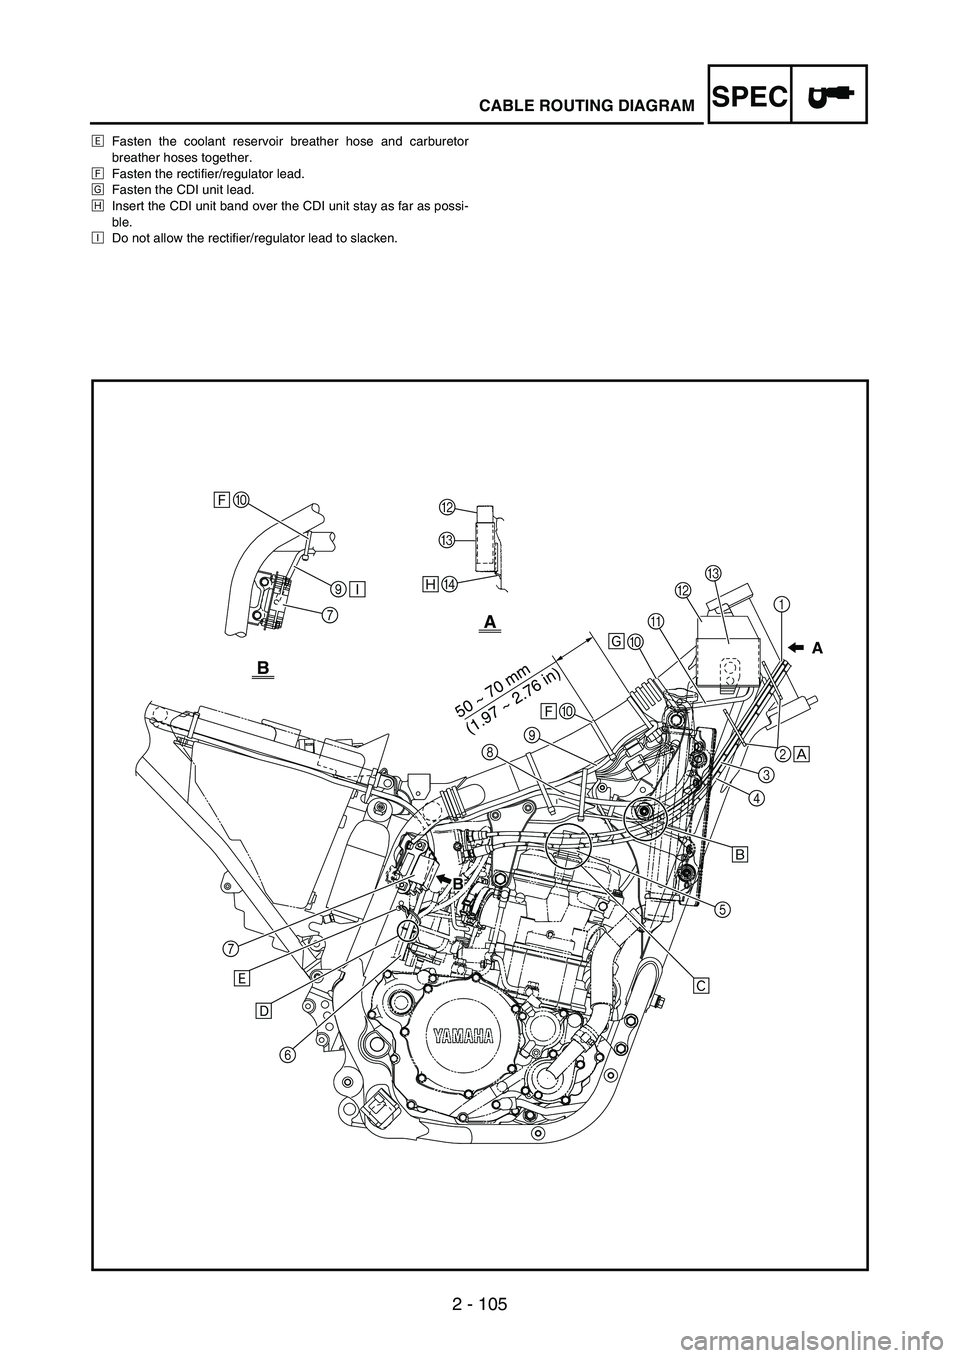 YAMAHA WR 250F 2004  Manuale de Empleo (in Spanish) SPEC
2 - 105
ÌFasten the coolant reservoir breather hose and carburetor
breather hoses together.
ÍFasten the rectifier/regulator lead.
ÎFasten the CDI unit lead.
ÏInsert the CDI unit band over the